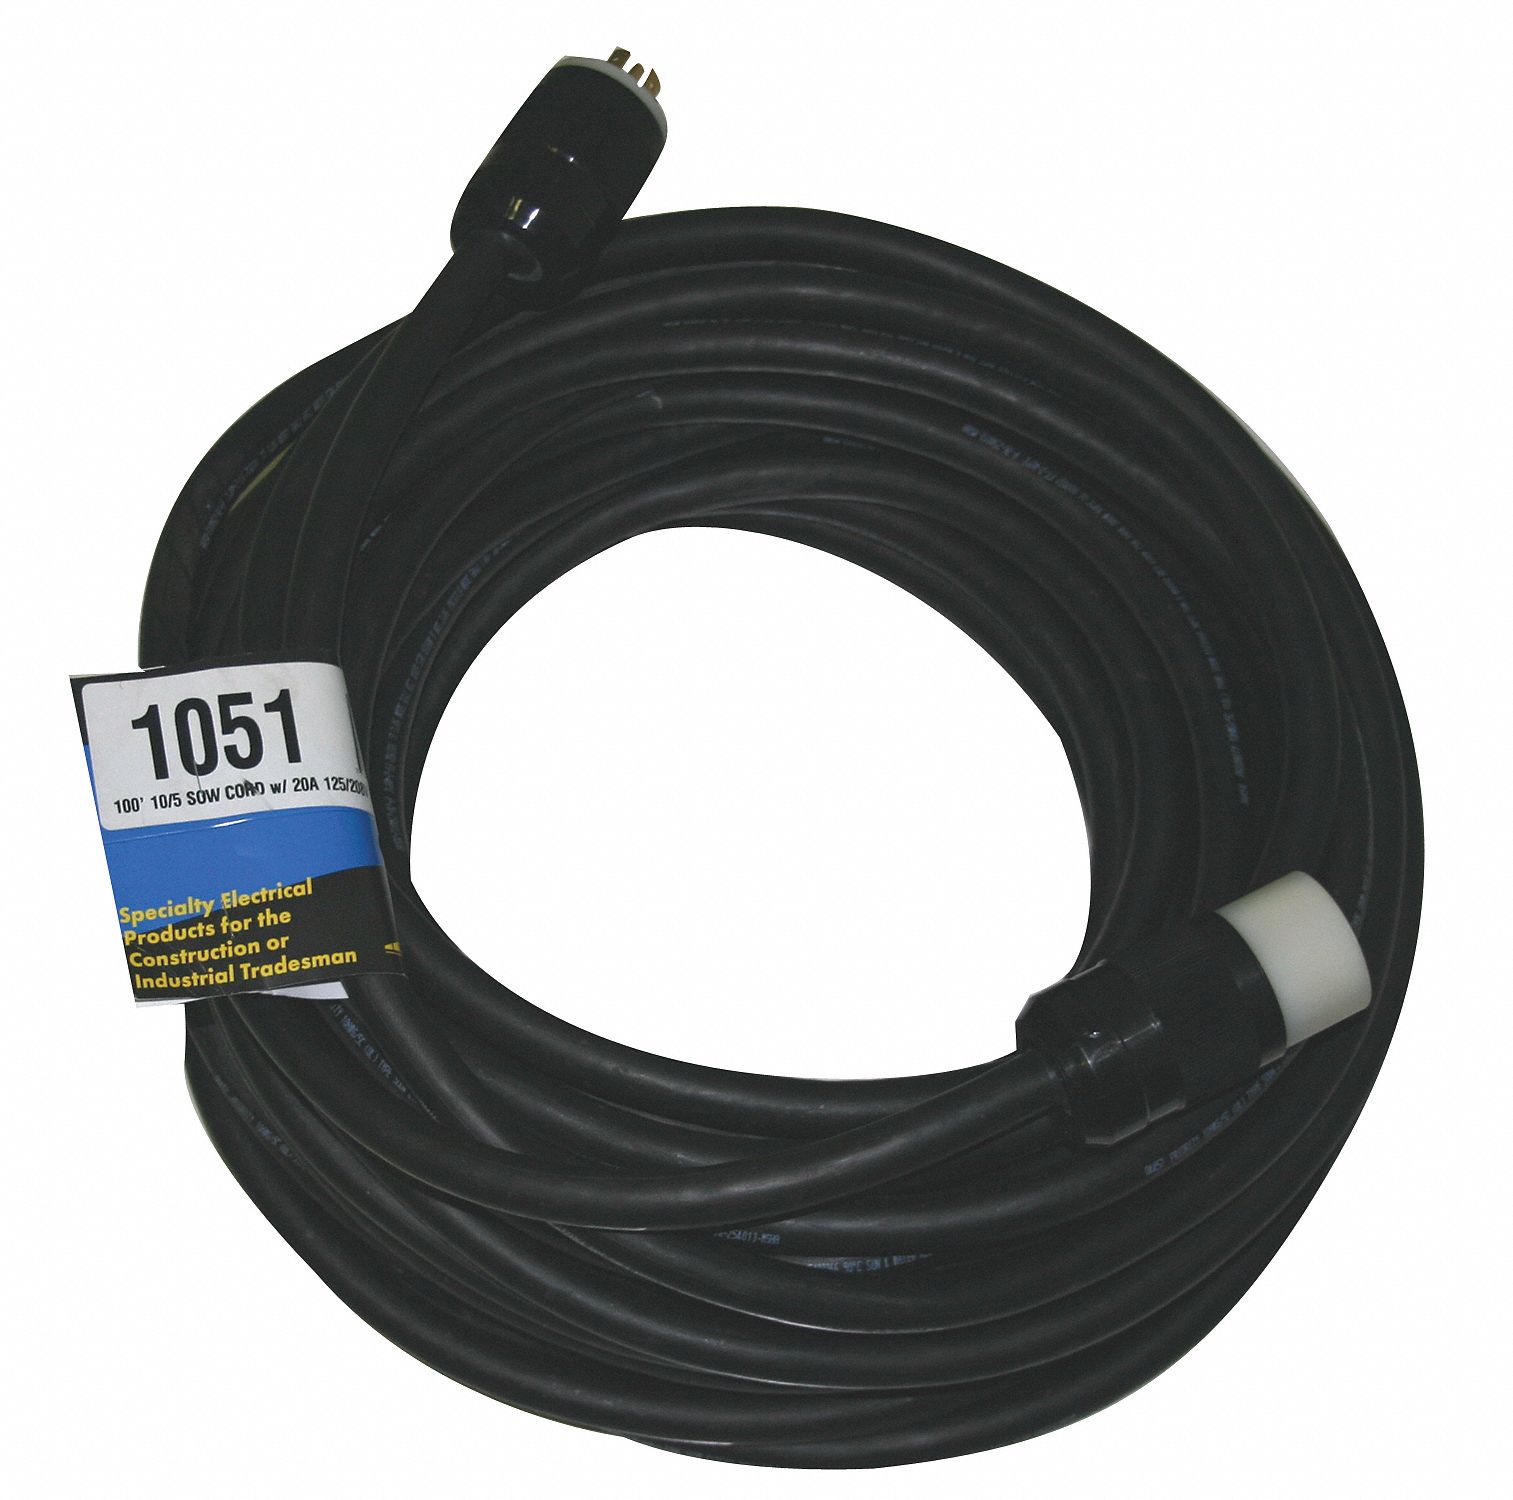 Indoor/Outdoor Extension Cord, 100 ft. Cord Length, 10/5 Gauge/Conductor, 30 Max. Amps